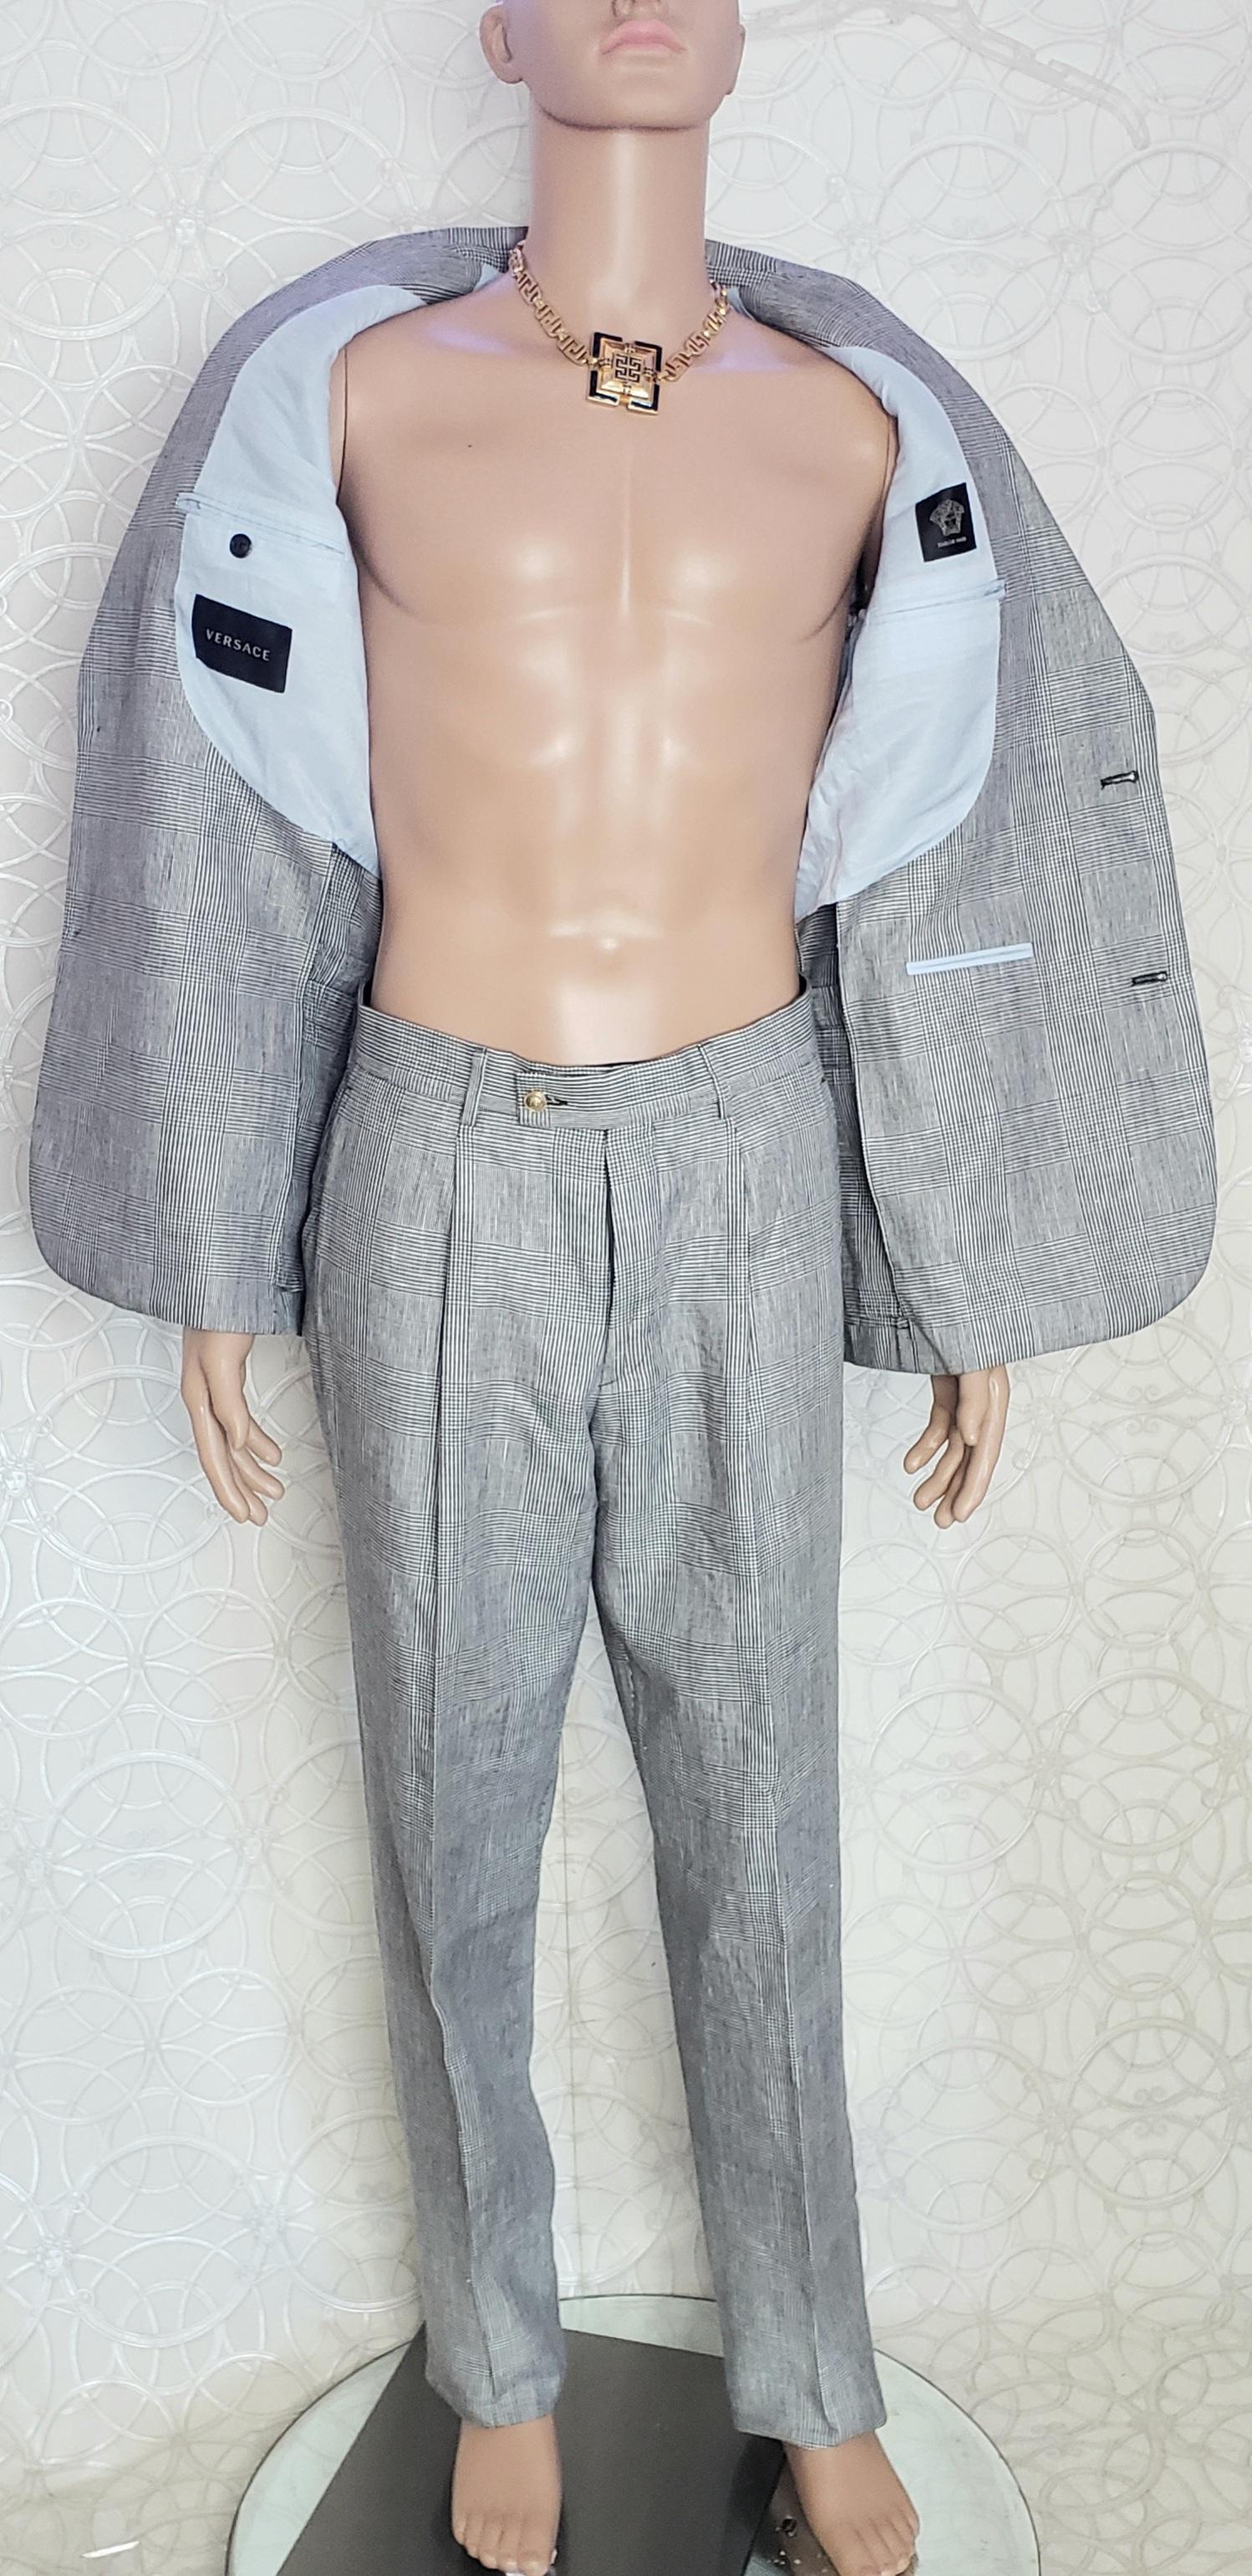 VERSACE S/S 2012 look # 2 BRAND NEW GRAY SUIT 48 - 38 (M) For Sale 6